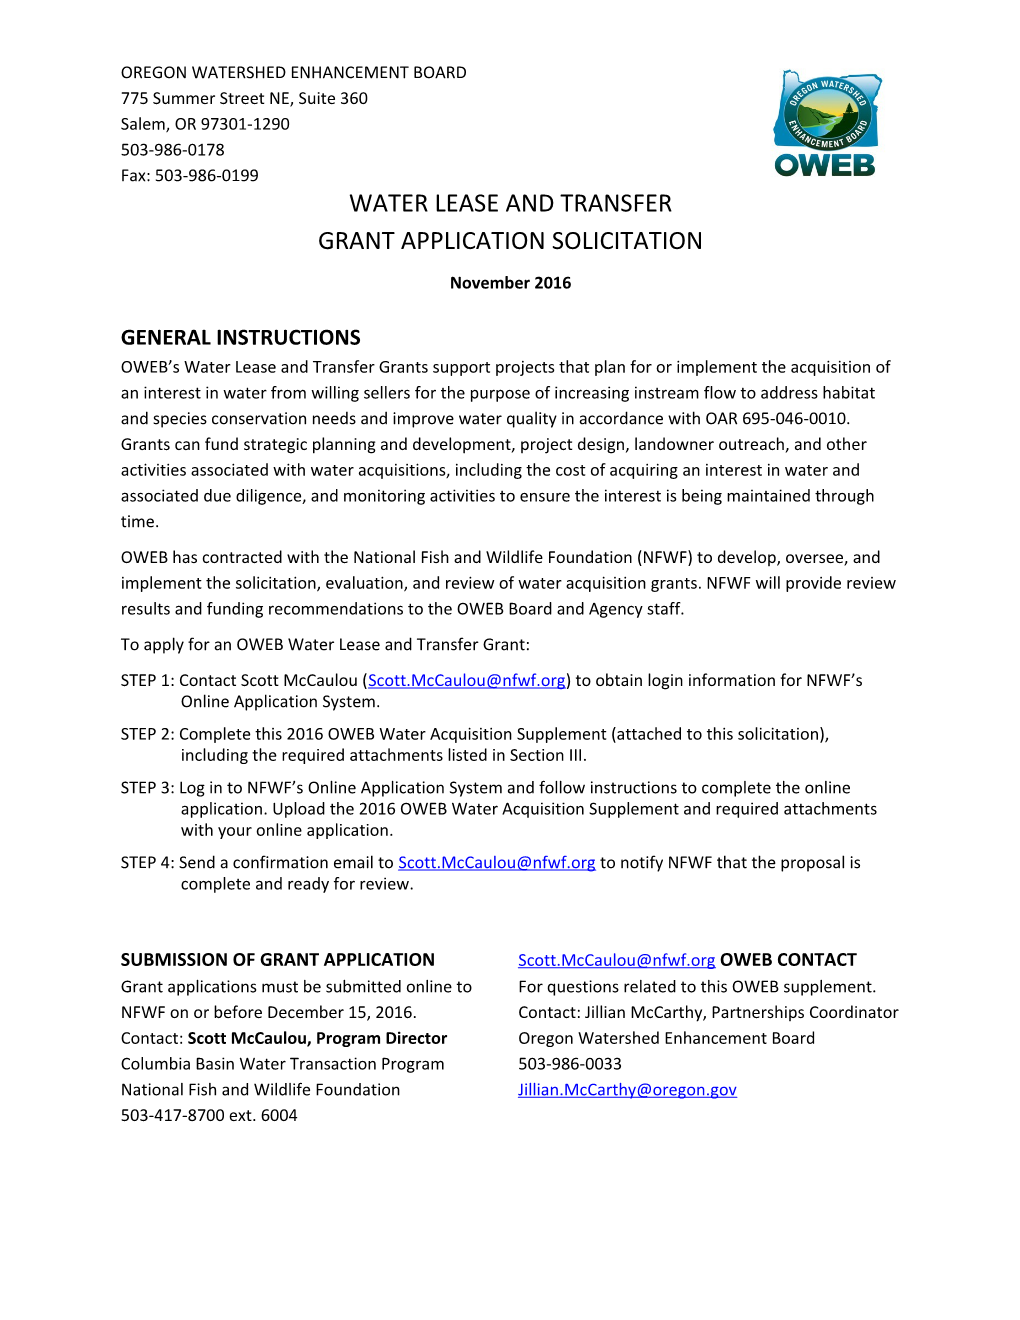 Water Lease and Transfer